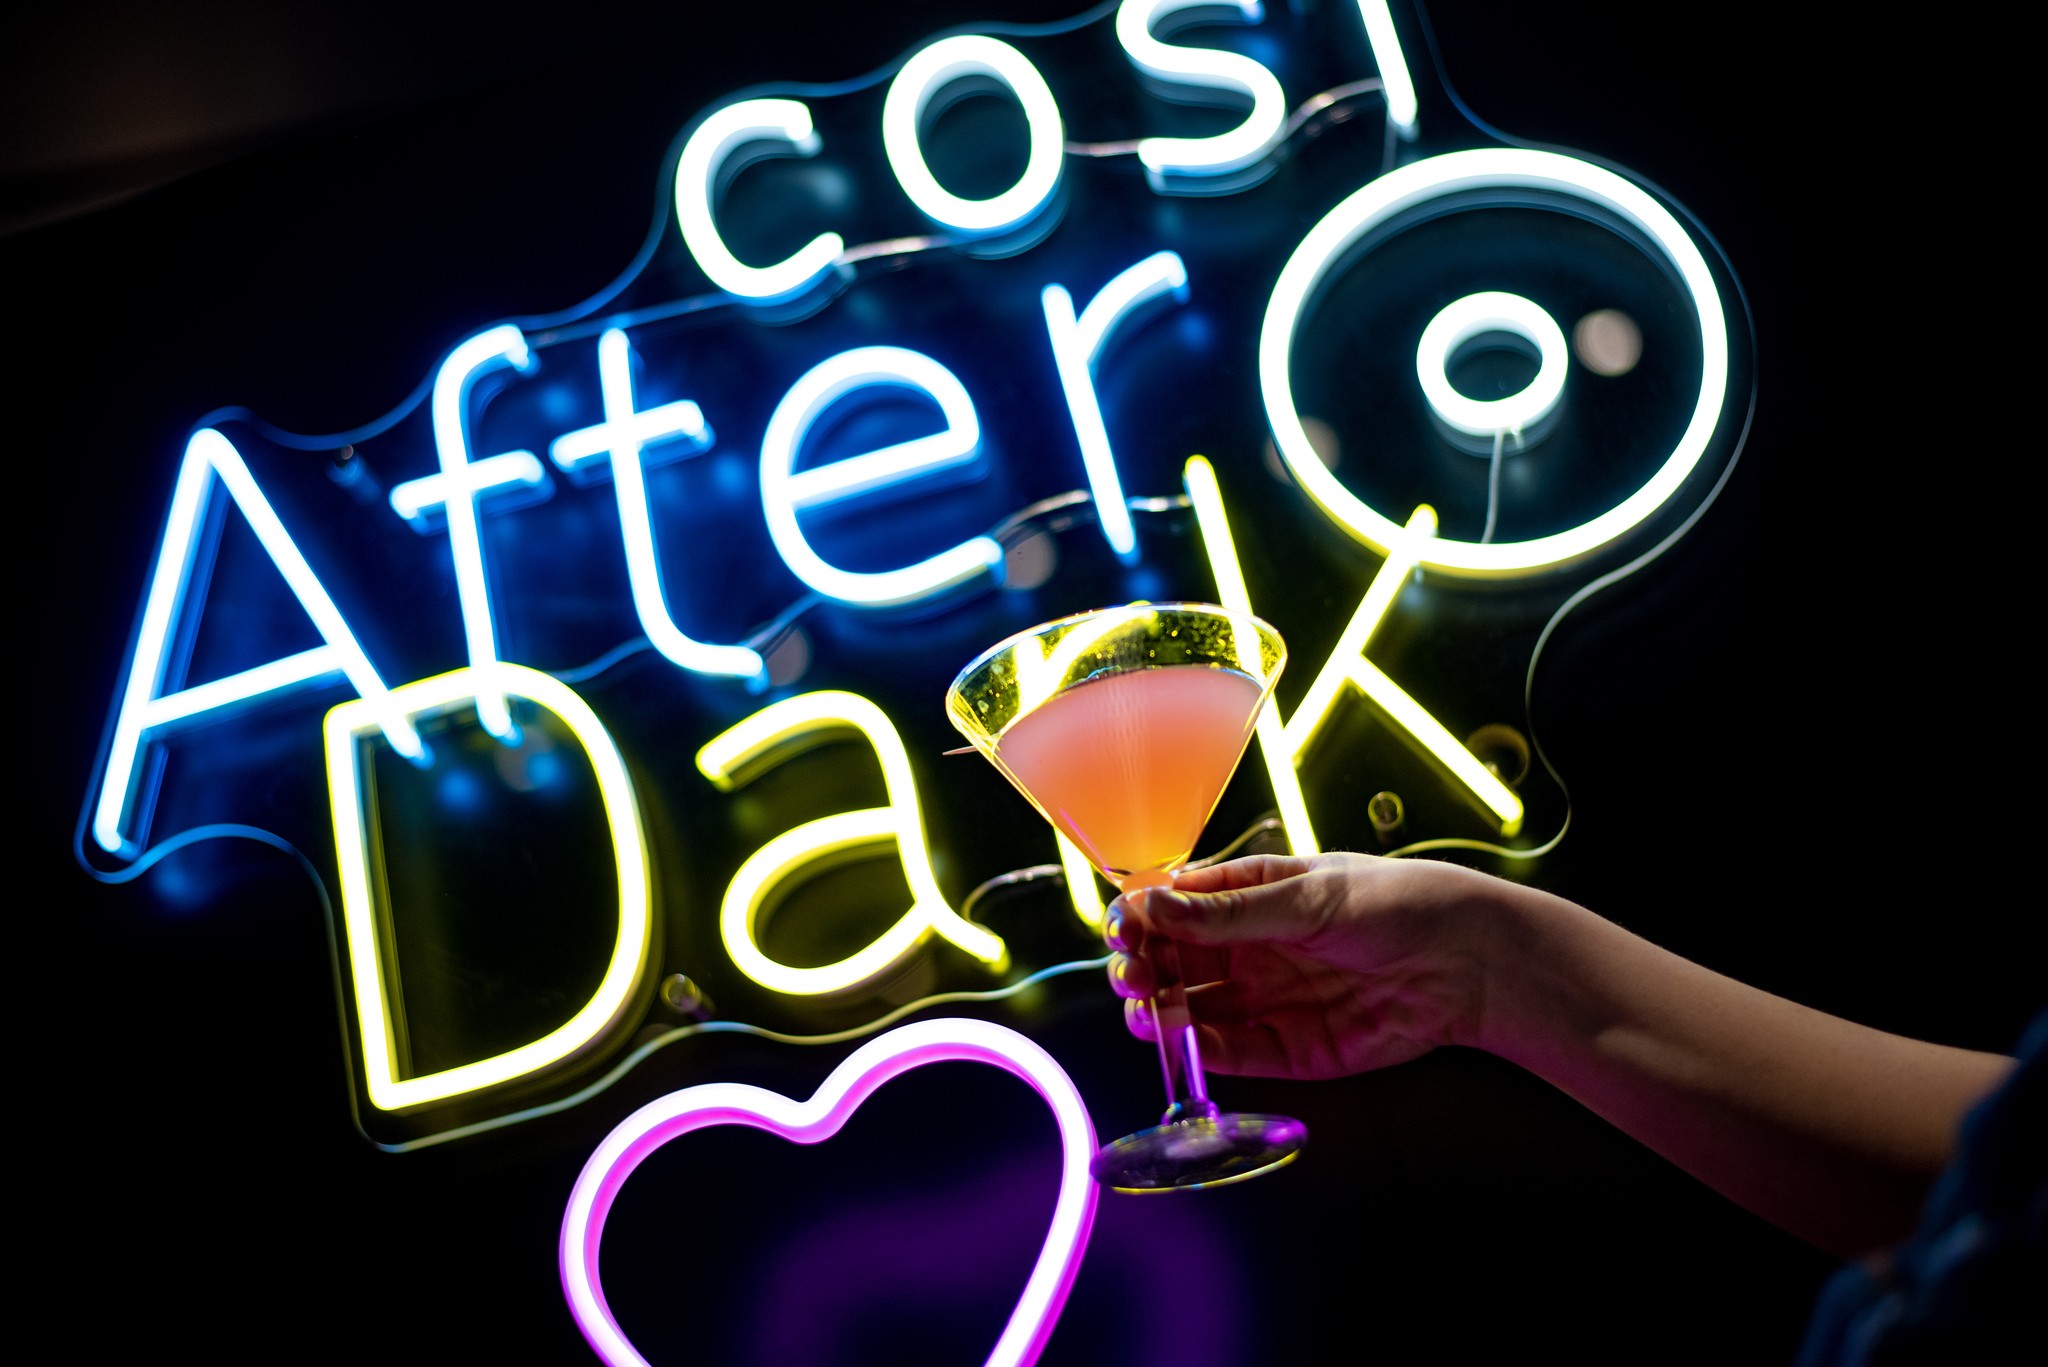 COSI hosts over 21 years old in COSI After Dark New Americans